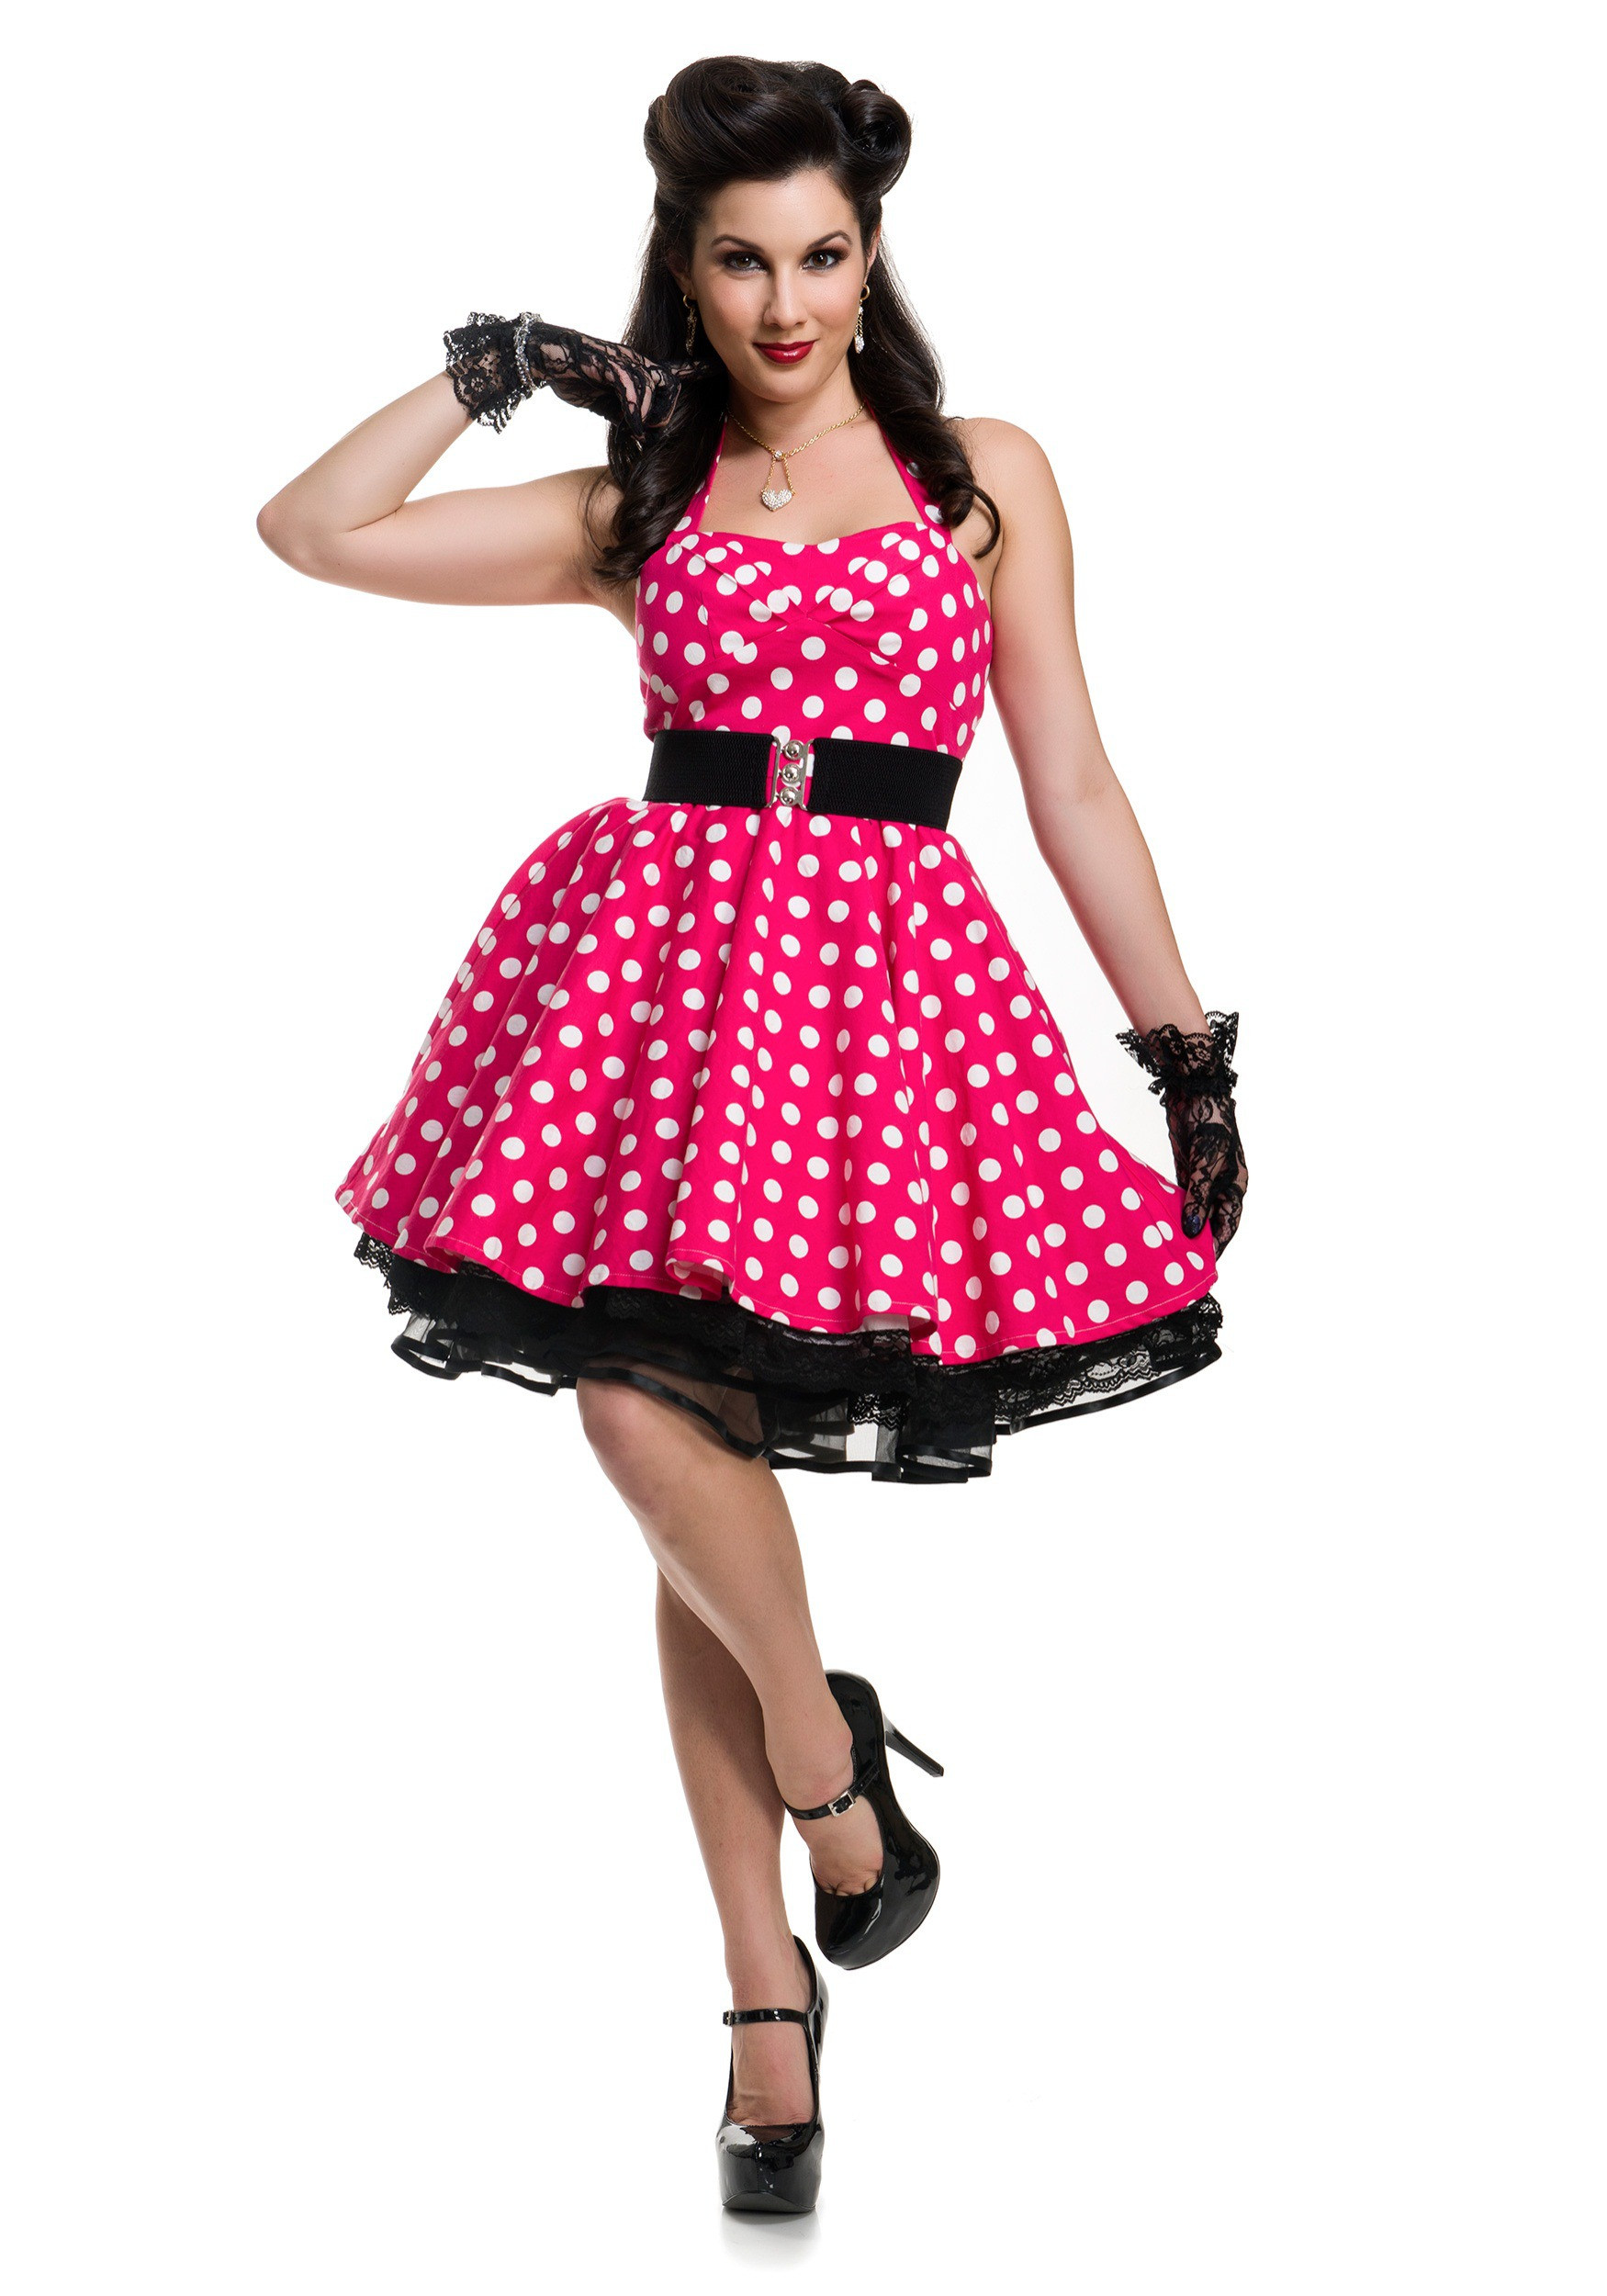 Pins Outfit
 Women s Pink Polka Dot Pin Up Costume